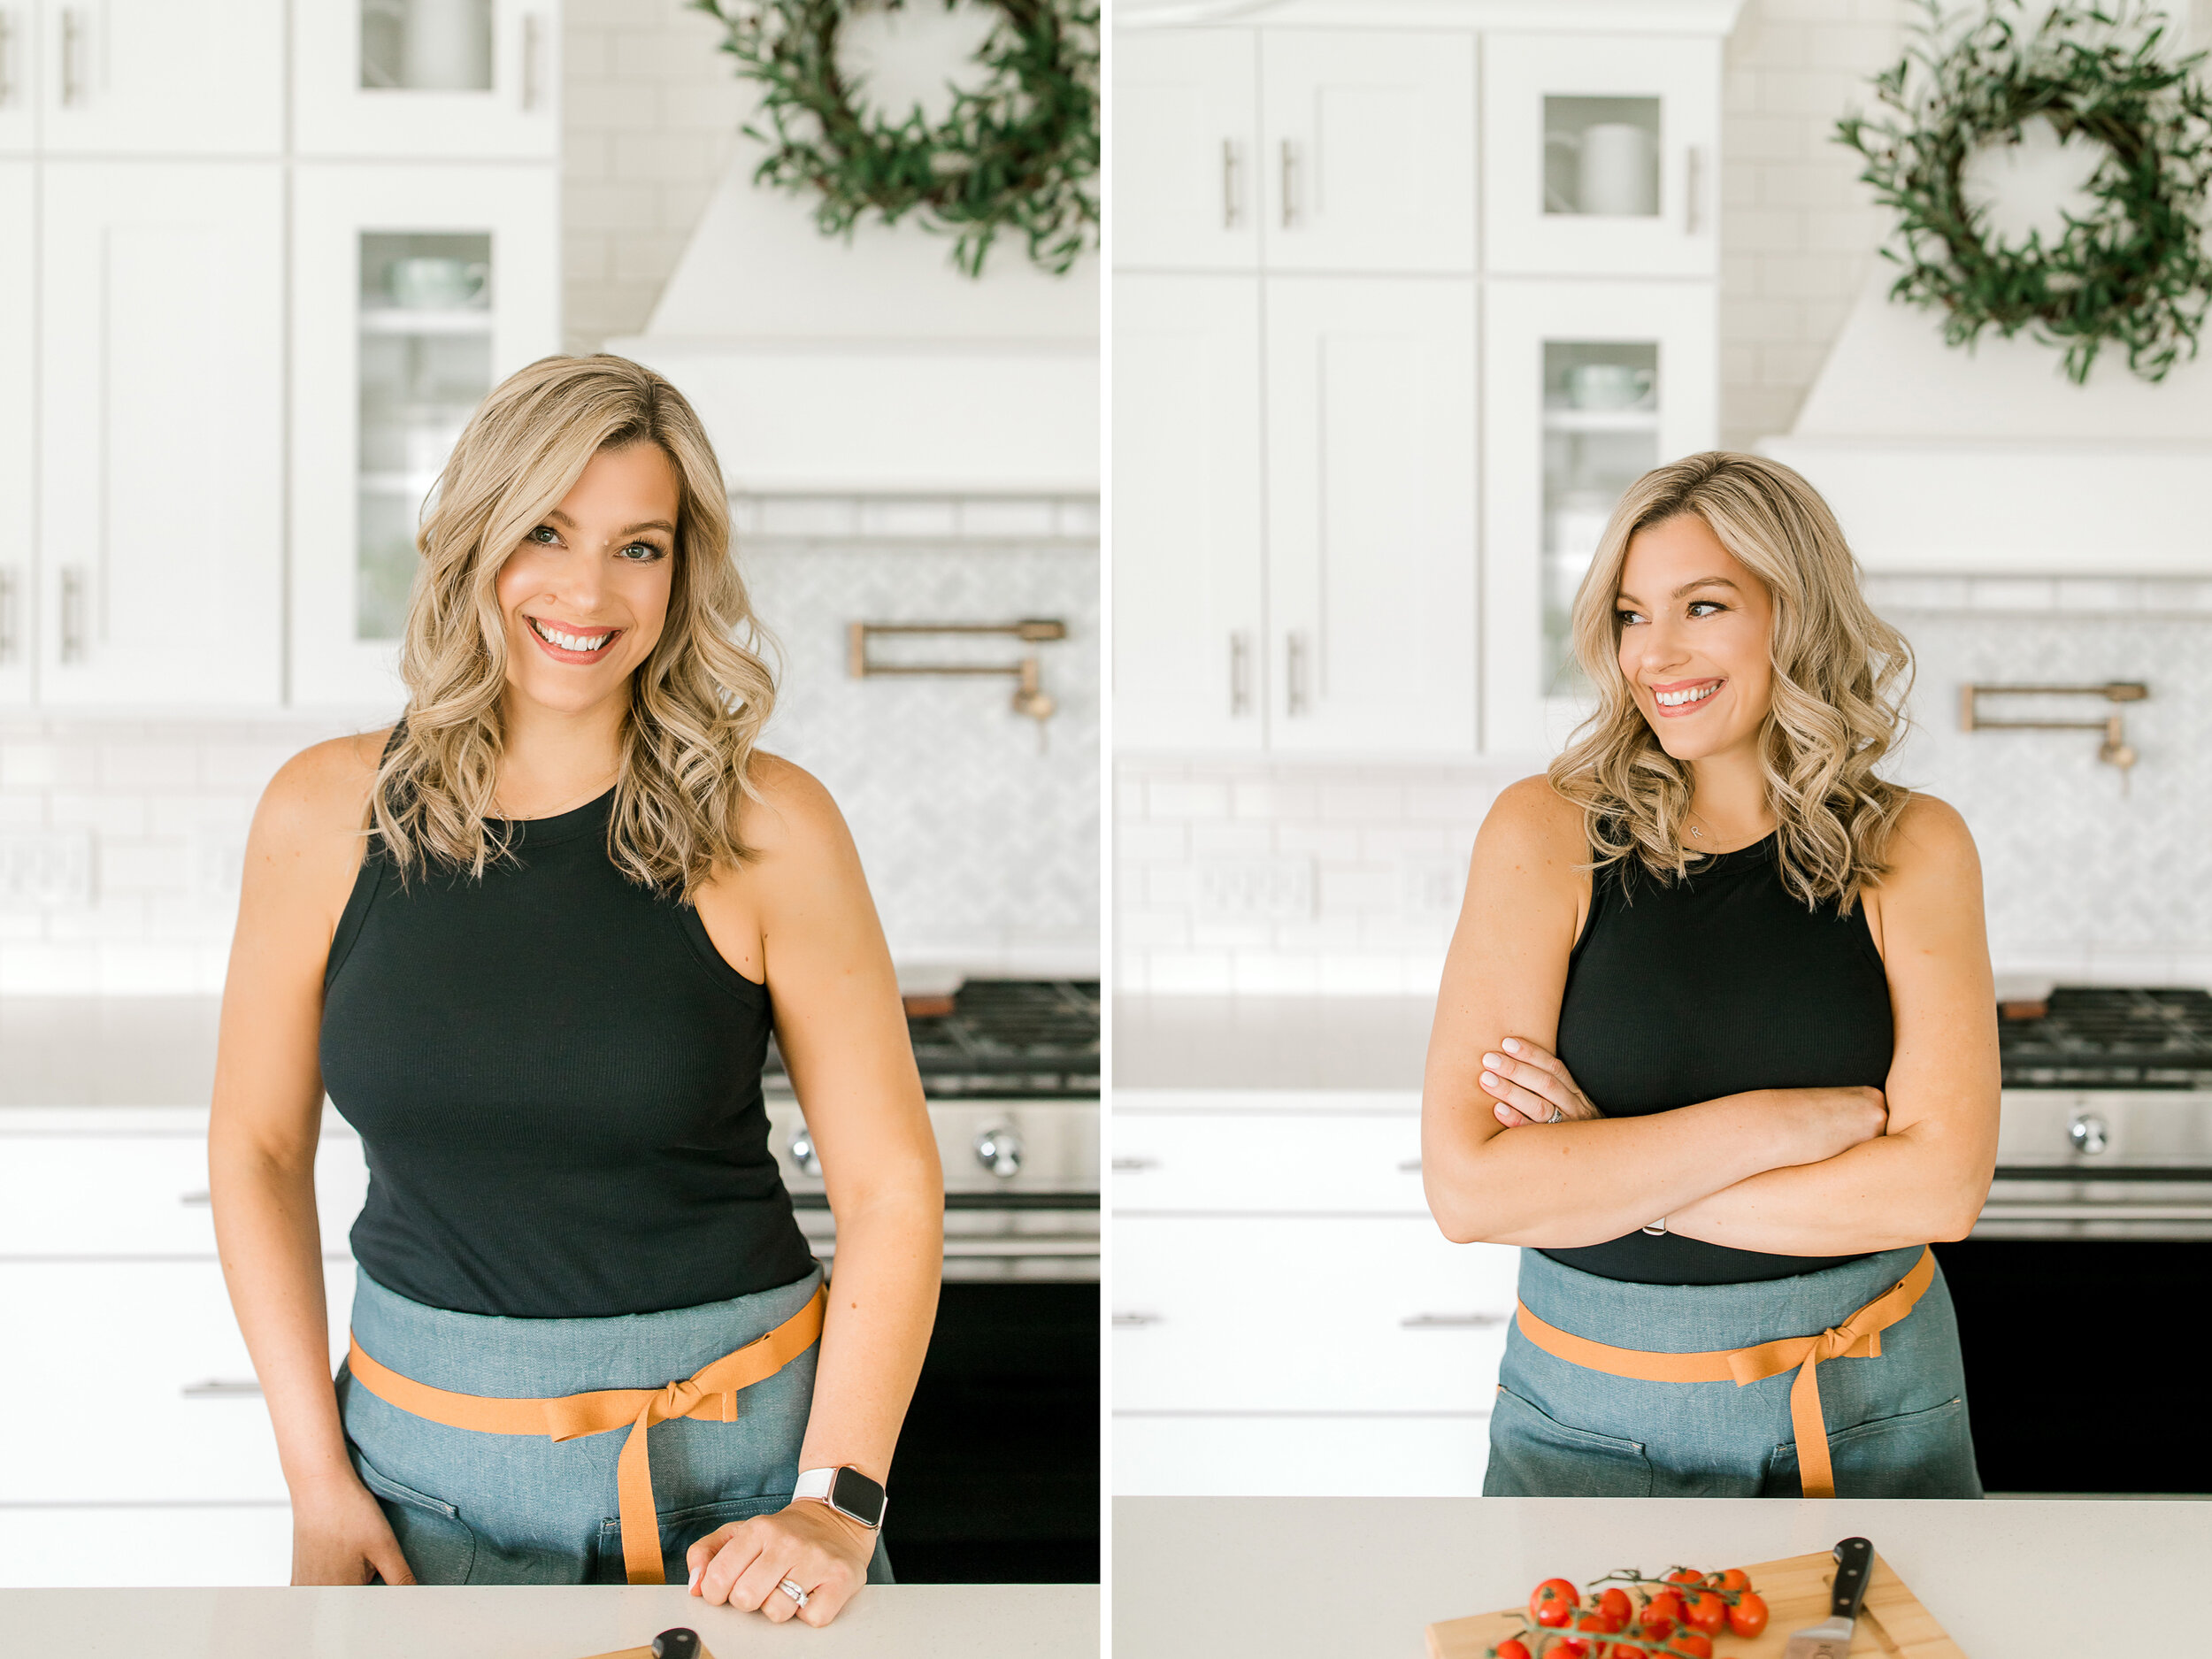 Food blogger lifestyle photography | Content creator photos | Light &amp; Airy Lifestyle Photographer in West Michigan